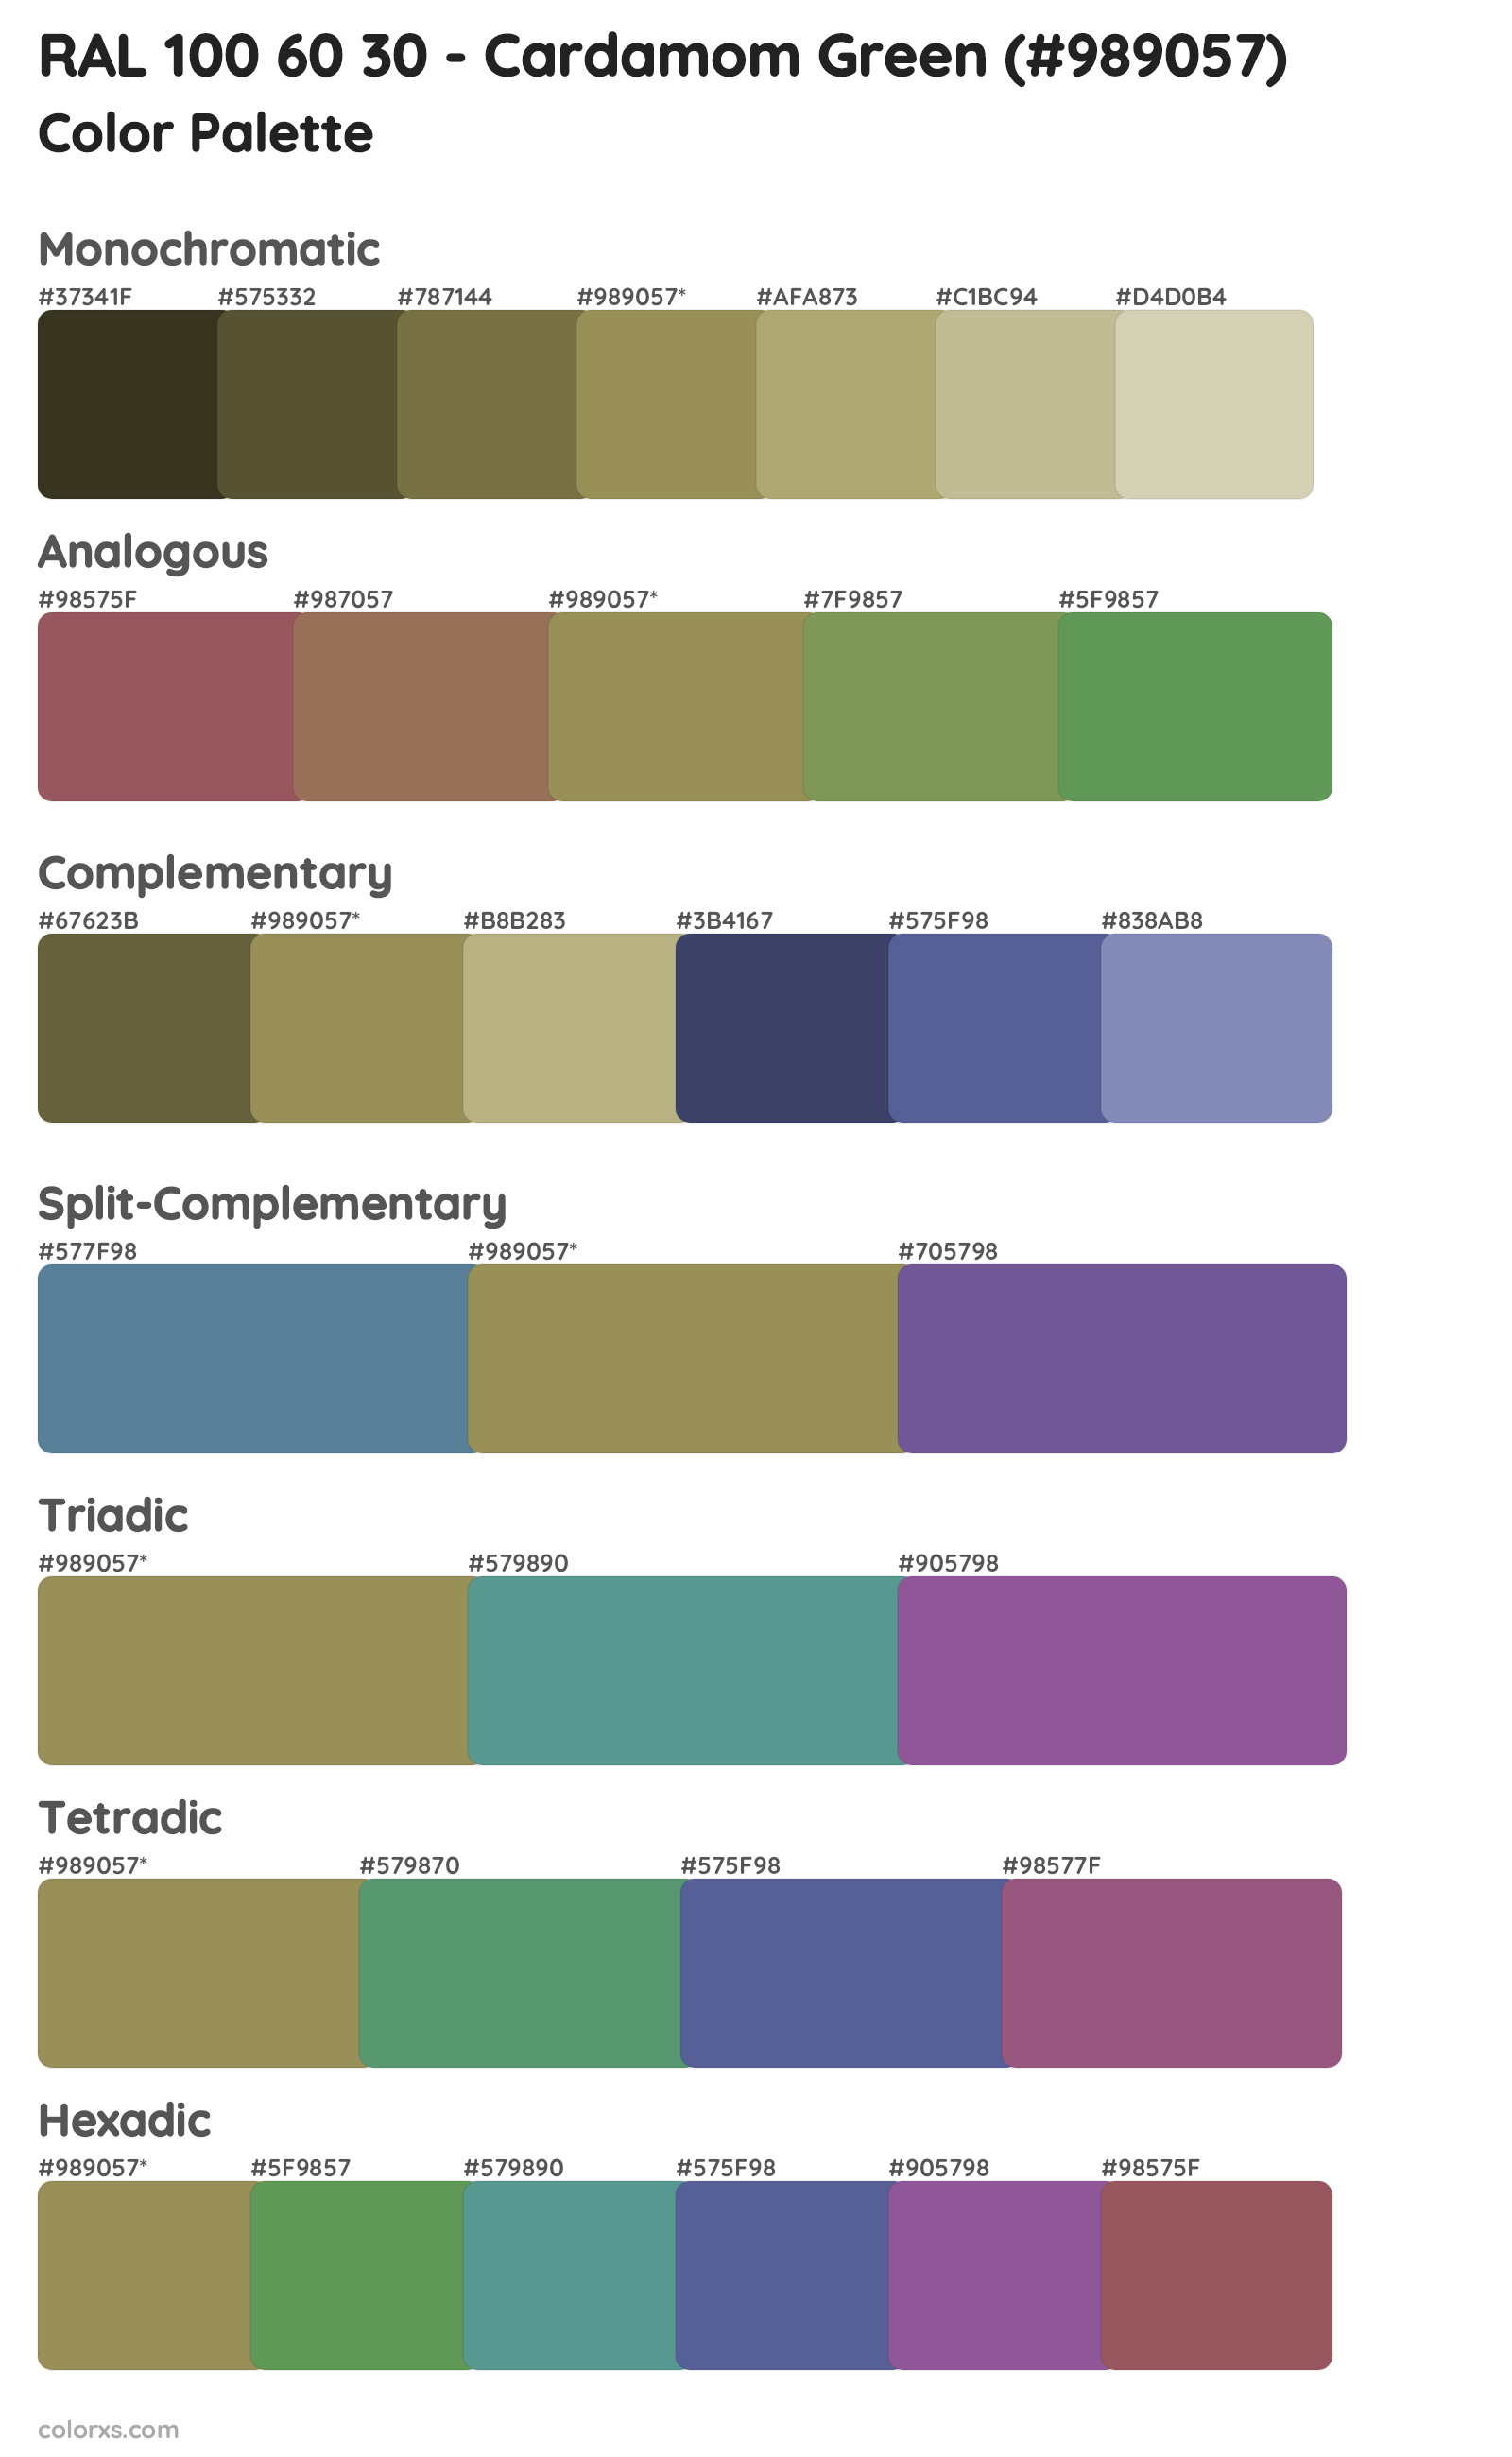 RAL 100 60 30 - Cardamom Green Color Scheme Palettes